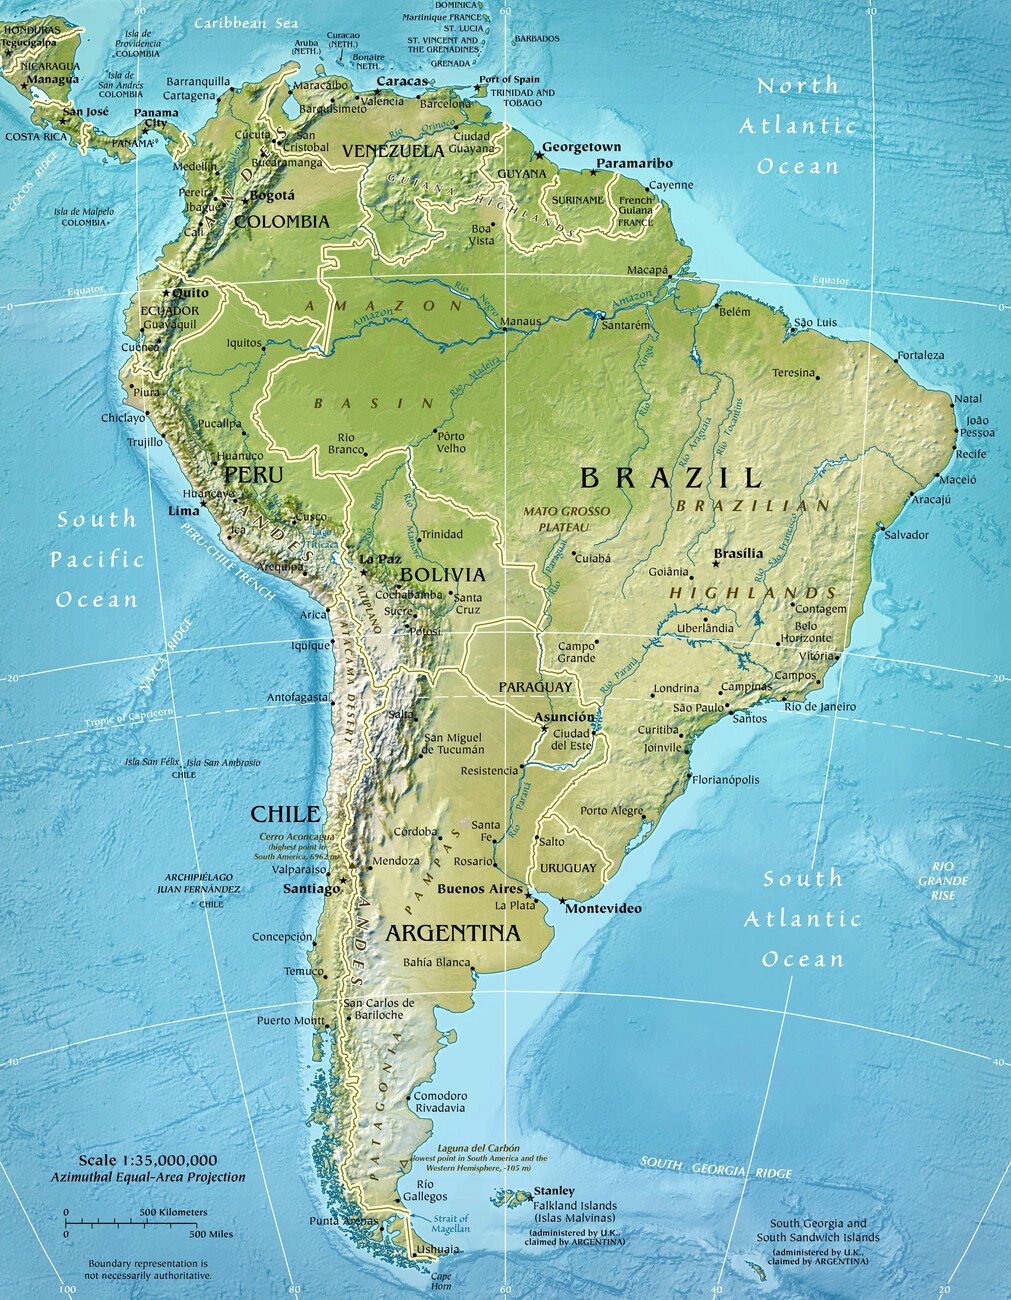 South America Physical Map Wall Mural. Buy online at Abposters.com